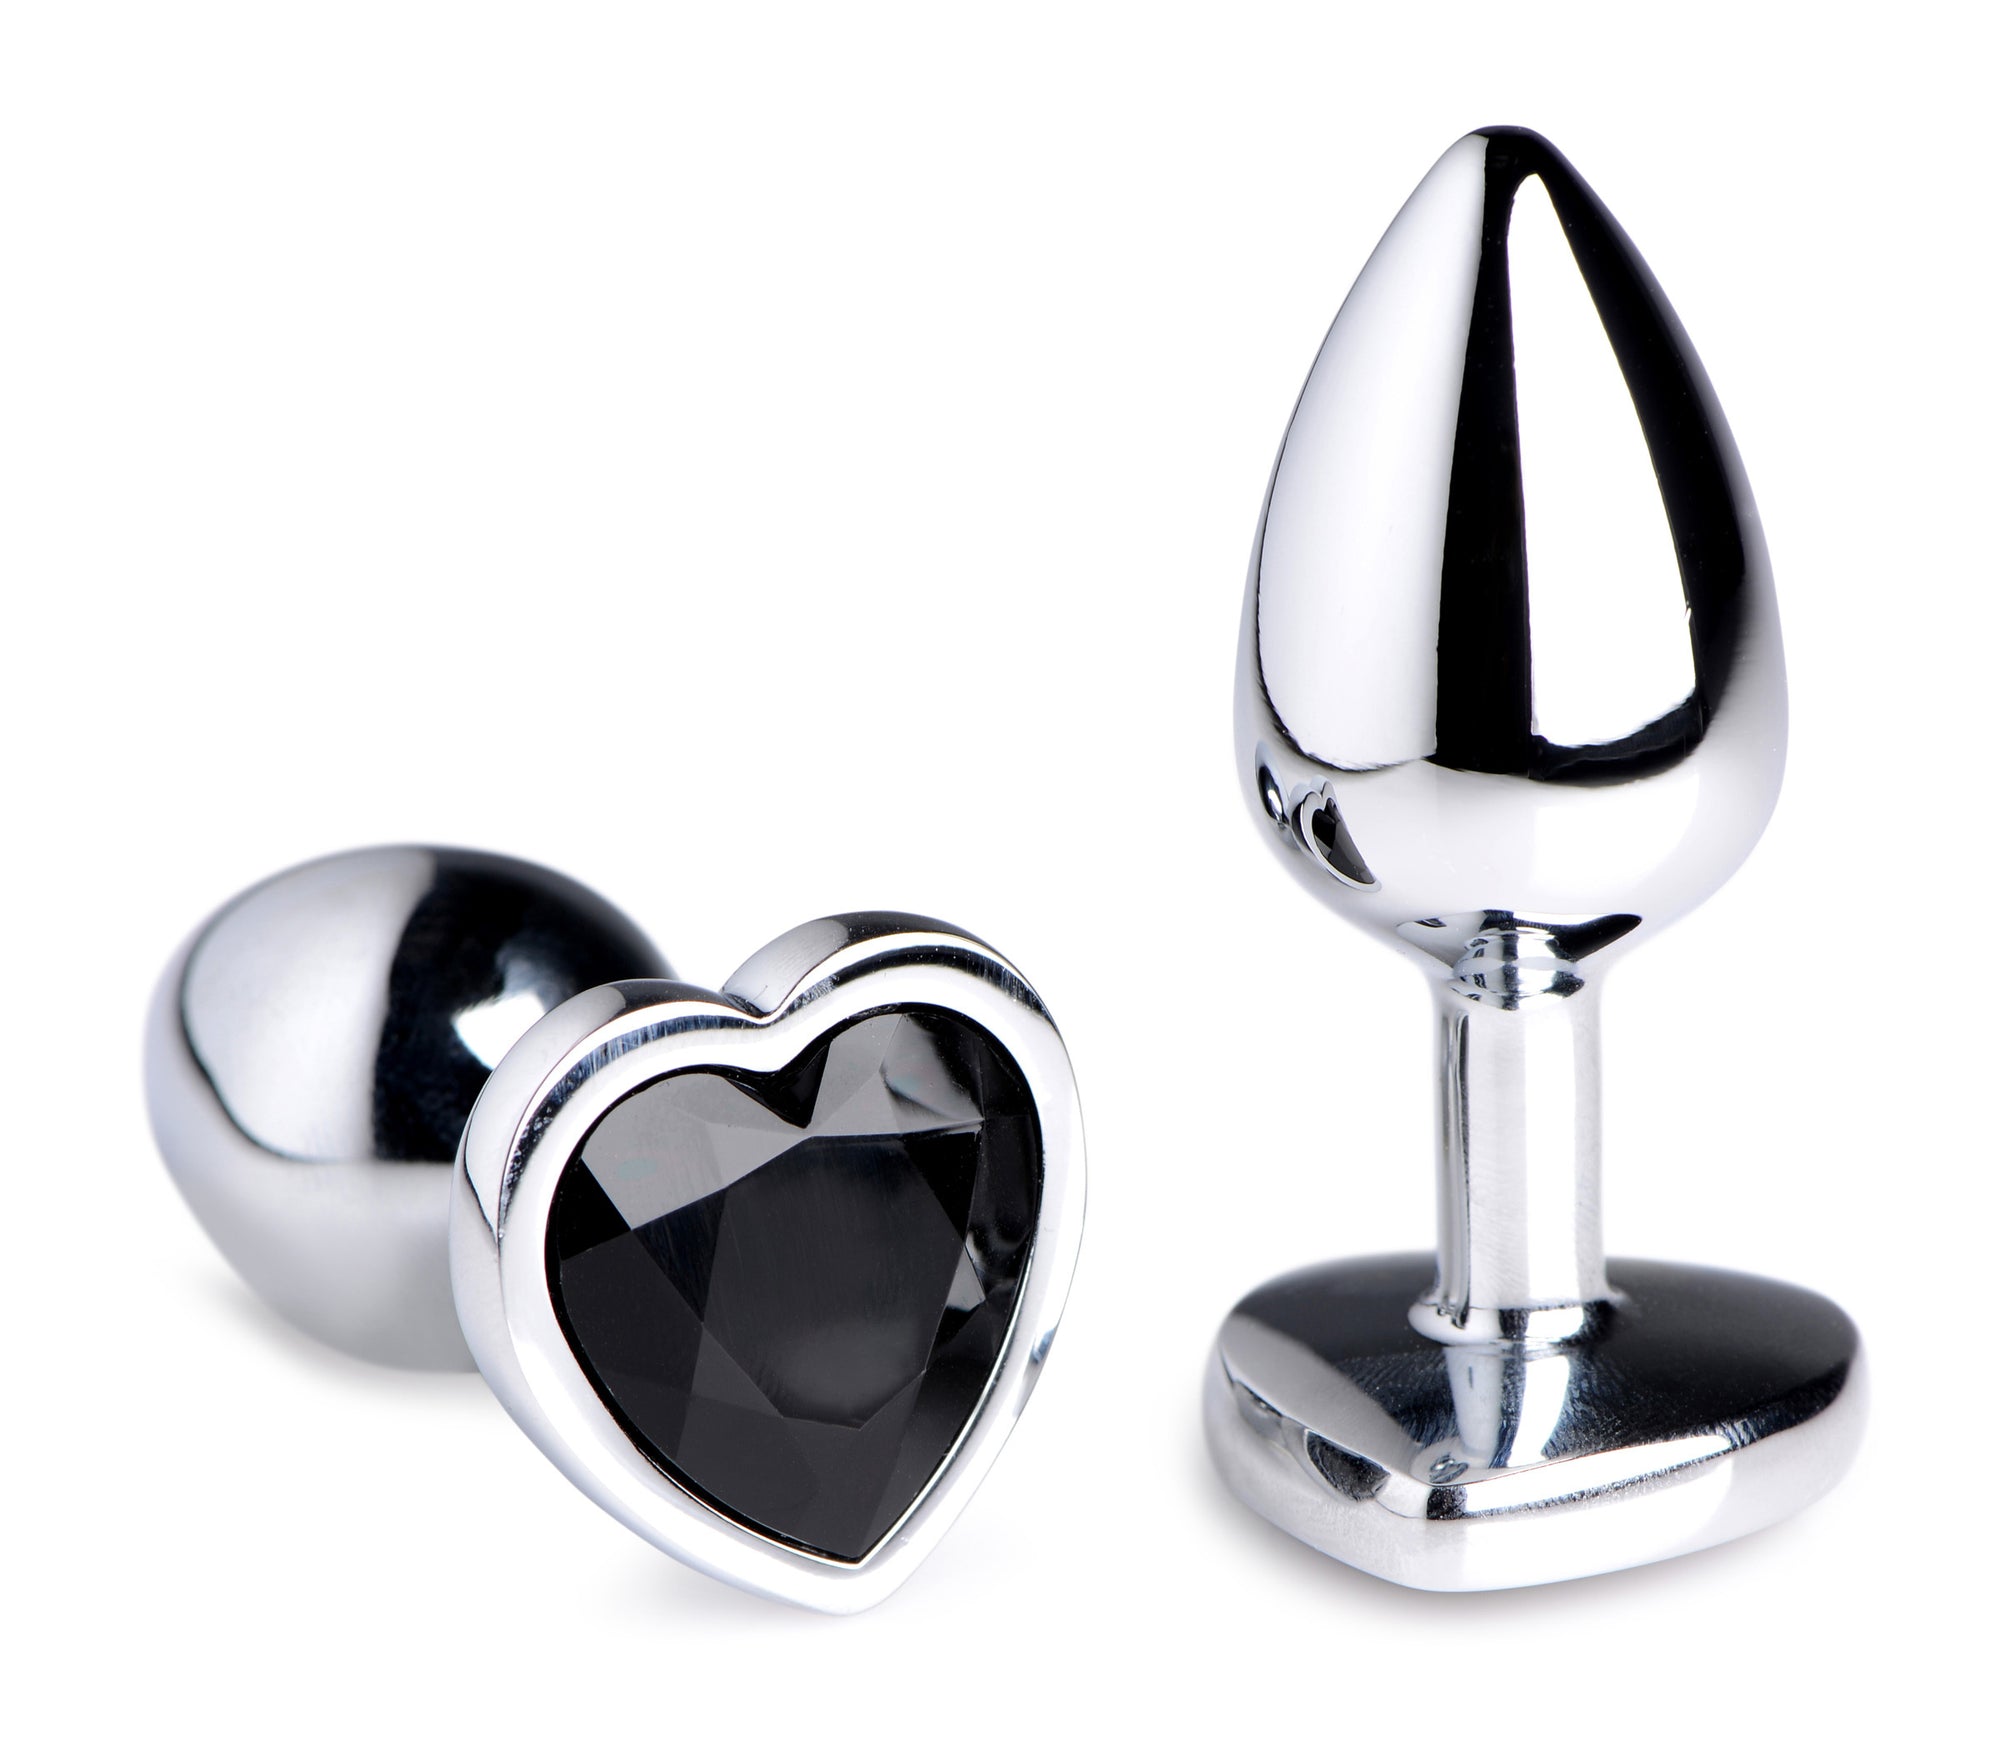 Black Heart Gem Anal Plug - Small | CupidsSecretStash.com
Decorate your derriere with this Dark Heart Anal Plug! Perfect for beginners to journey into the world of naughty backdoor fun - at Cupid’s Secret Stash Anal Toys
Booty Sparks 


Title: Default Title


Cupid’s Secret Stash